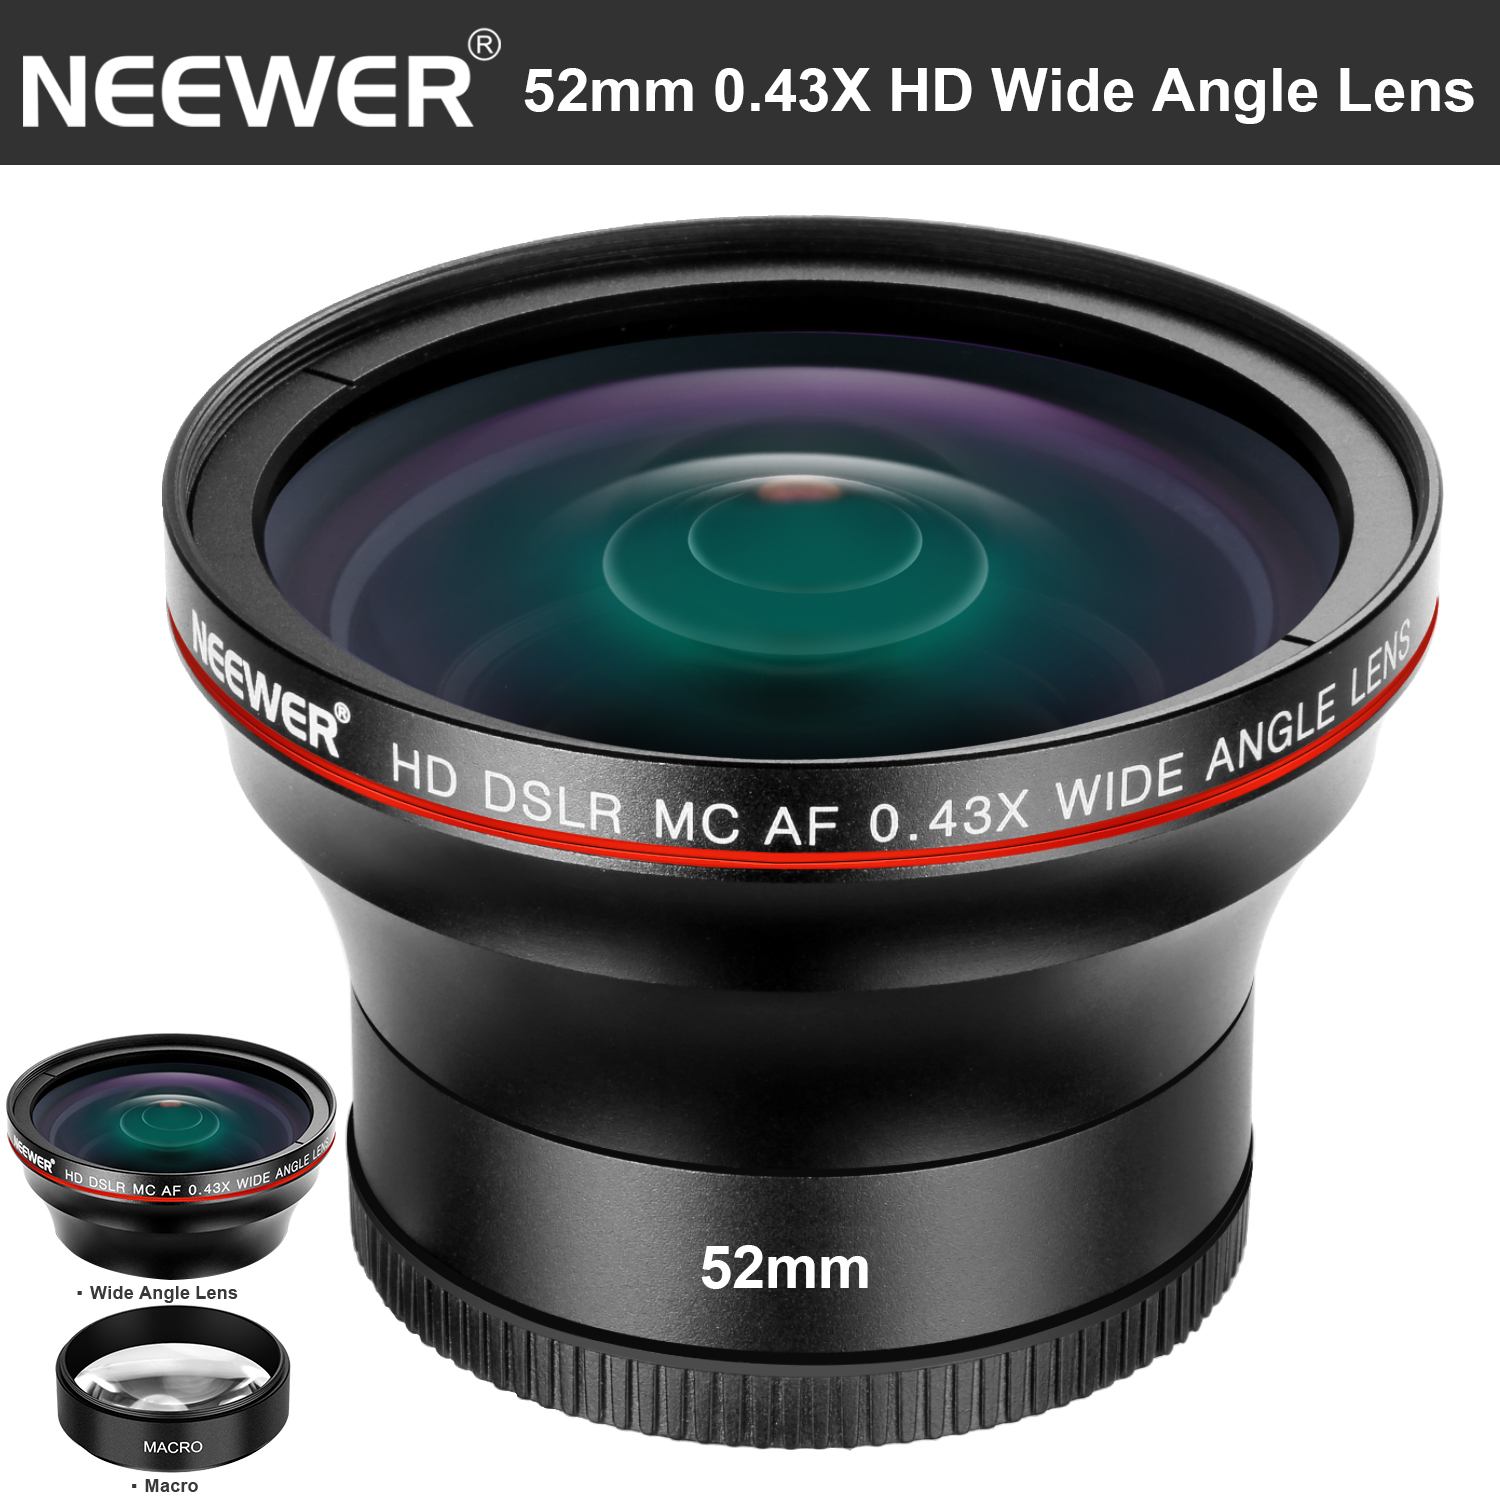 Neewer 52MM 0.43X HD Wide Angle Lens with Macro Close-Up Portion ...